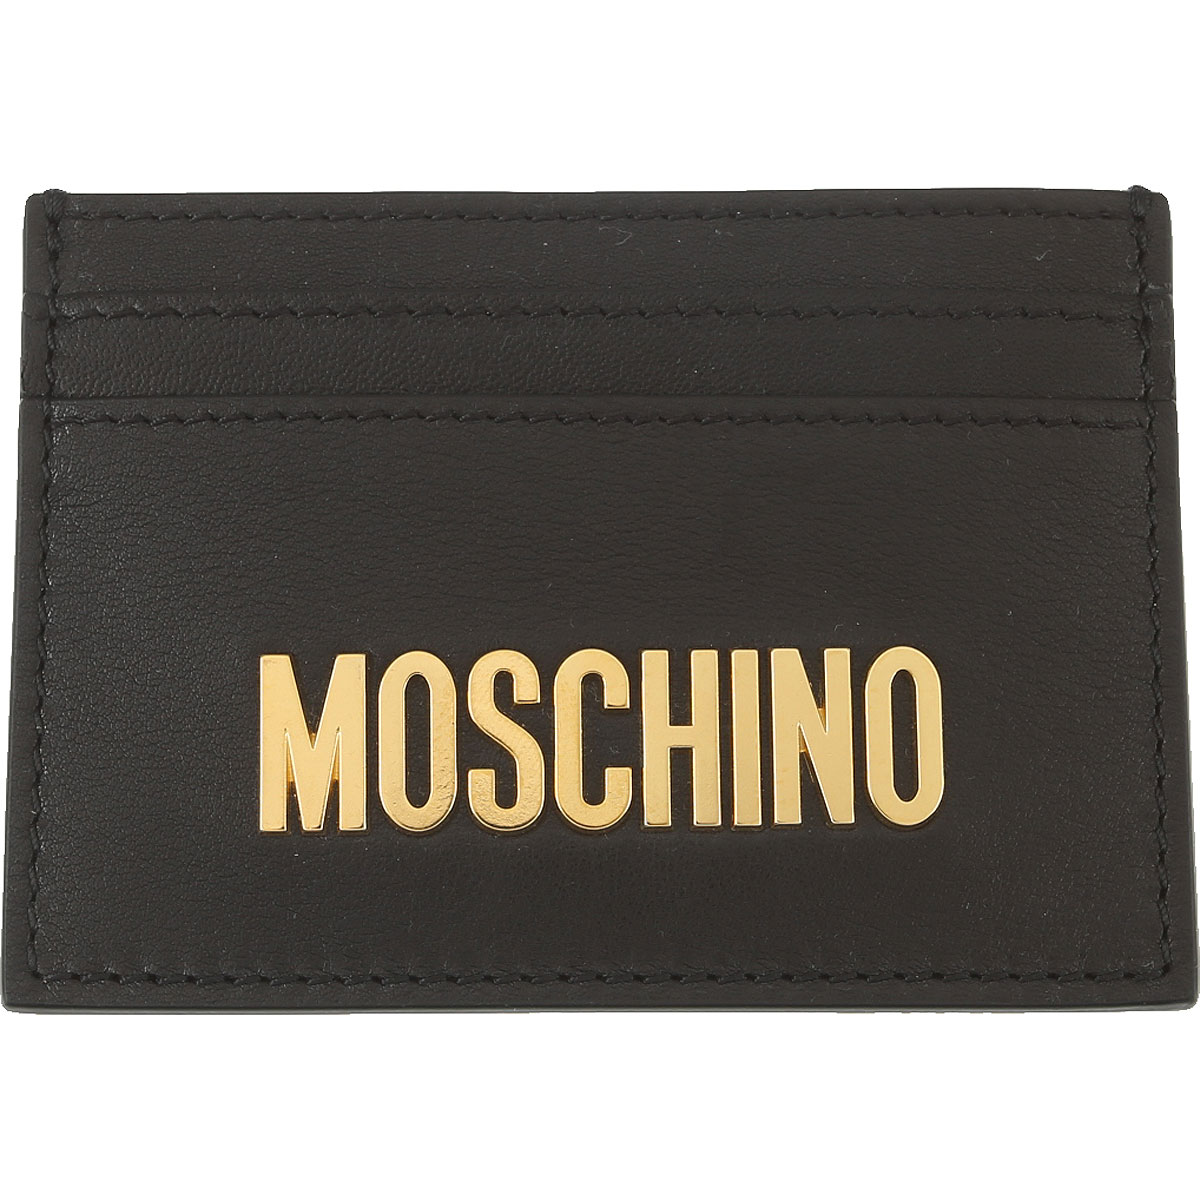 Mens Wallets Moschino, Style code: 8132-8001-